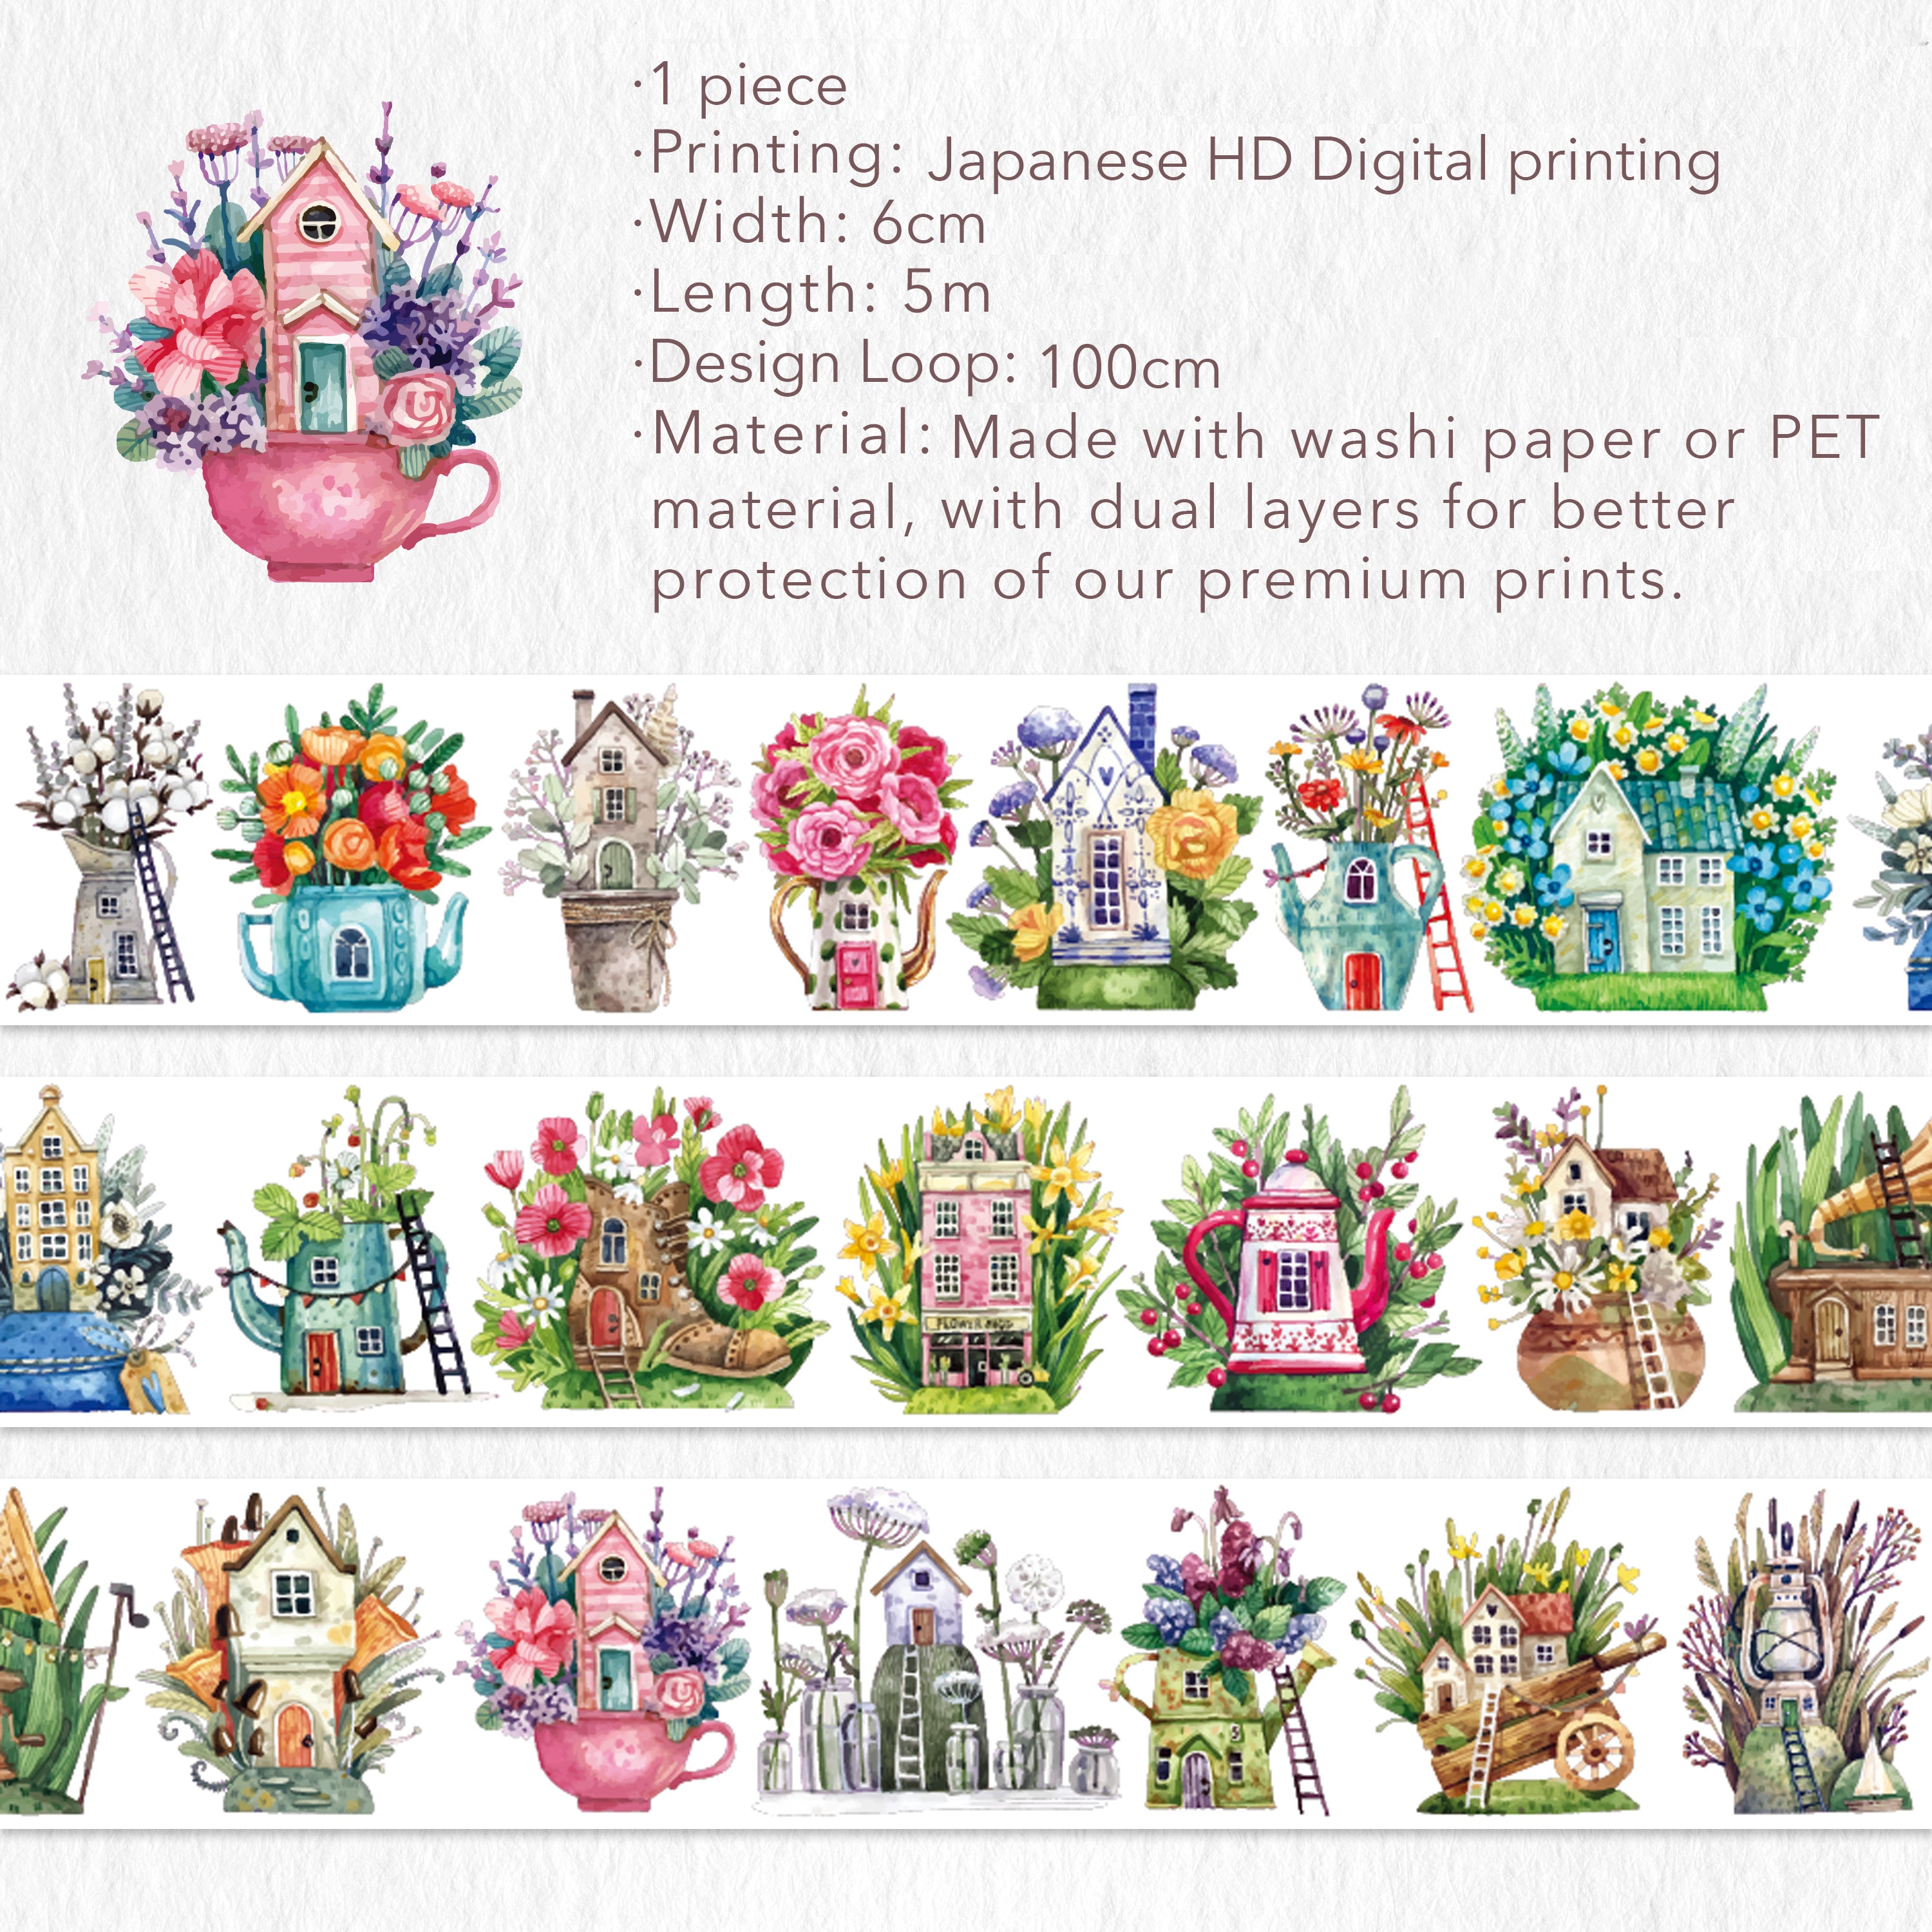 4cm Glossy PET Washi Tape-Different Department House - Shop A Great Idea  Washi Tape - Pinkoi